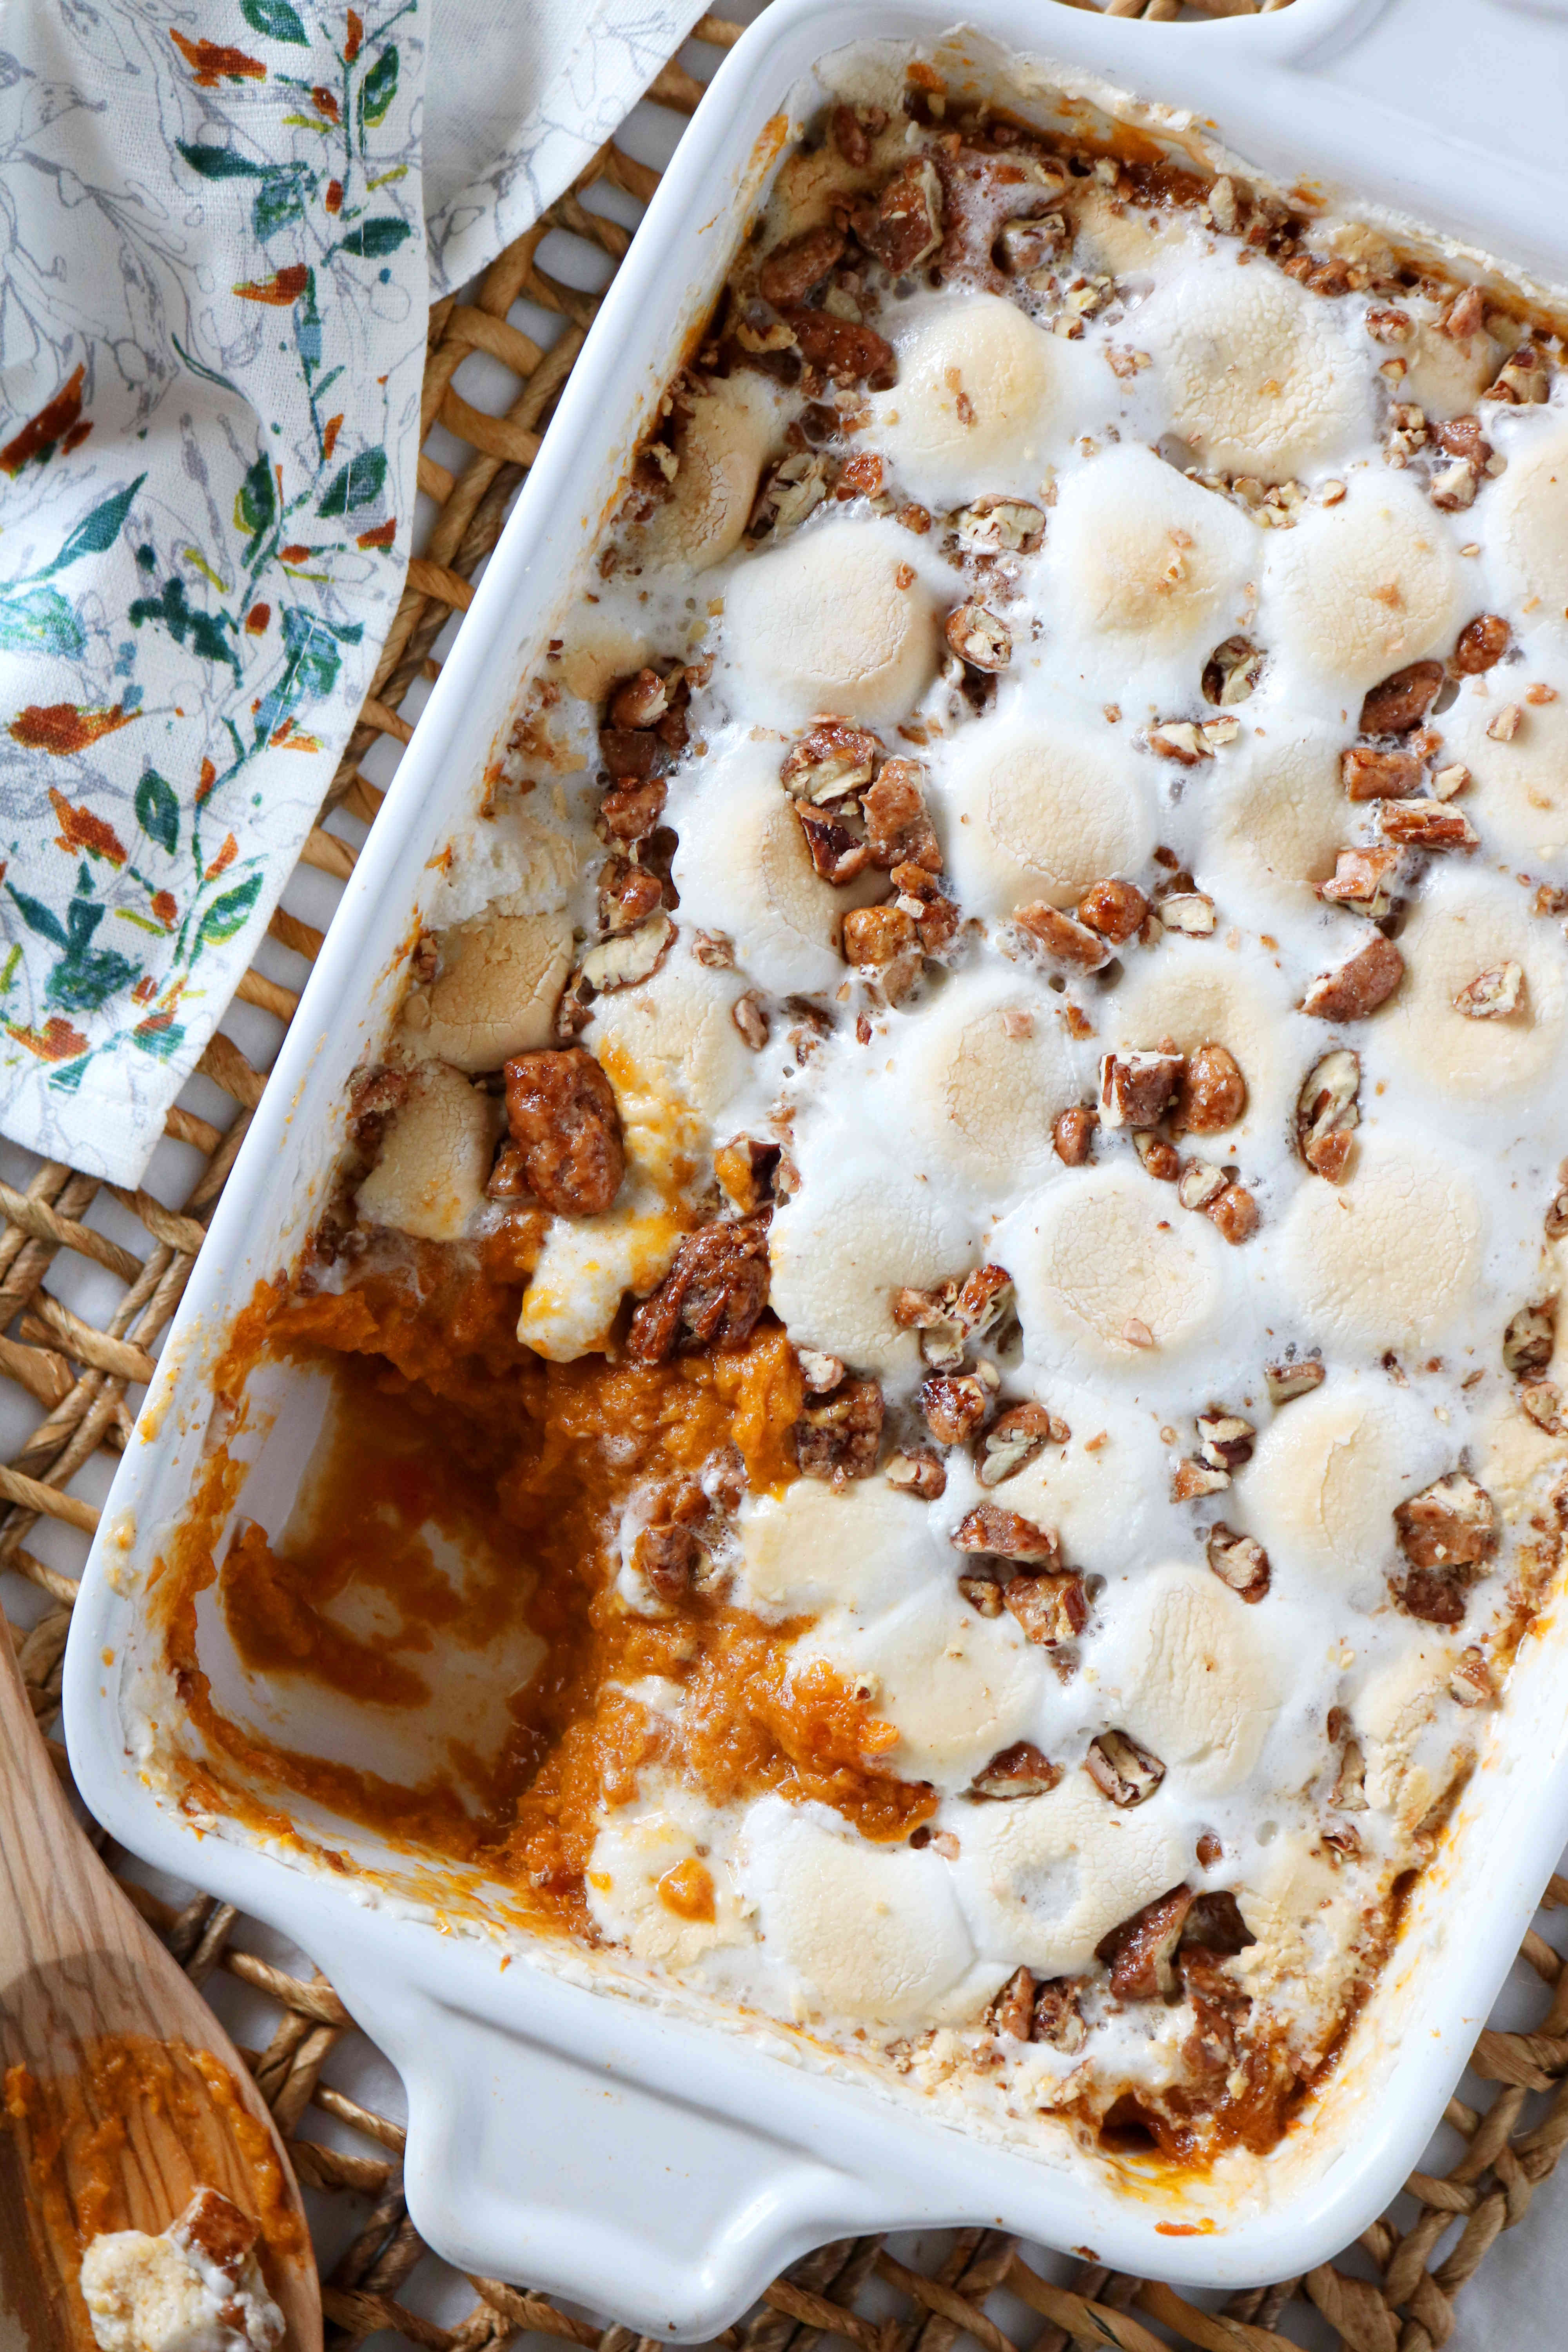 Candied Yams With Marshmallows And Pecans